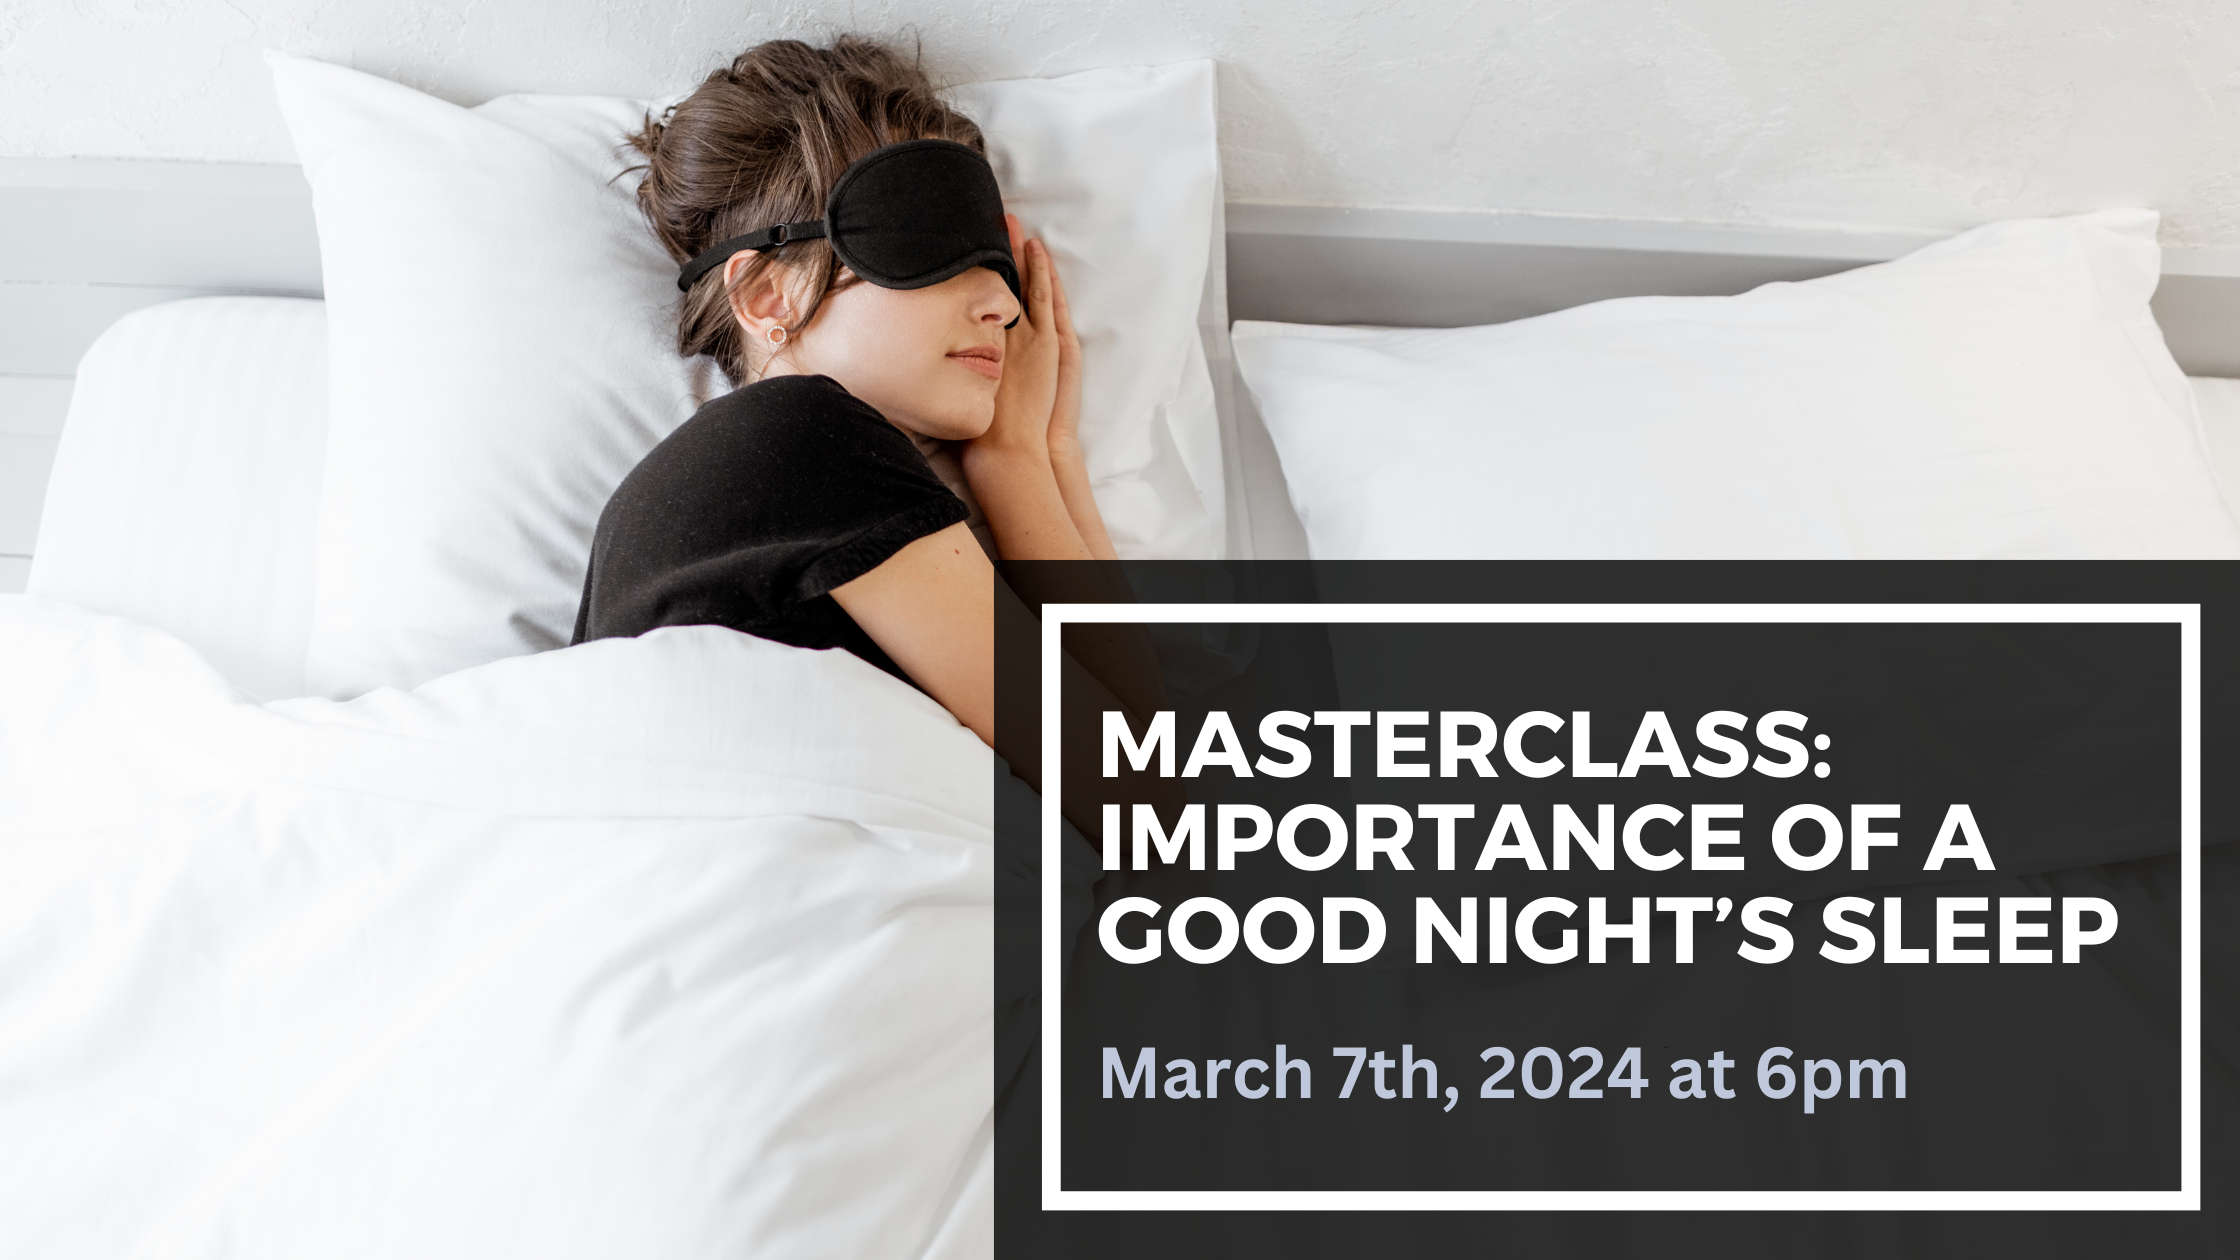 Masterclass: The Importance of a Good Night's Rest